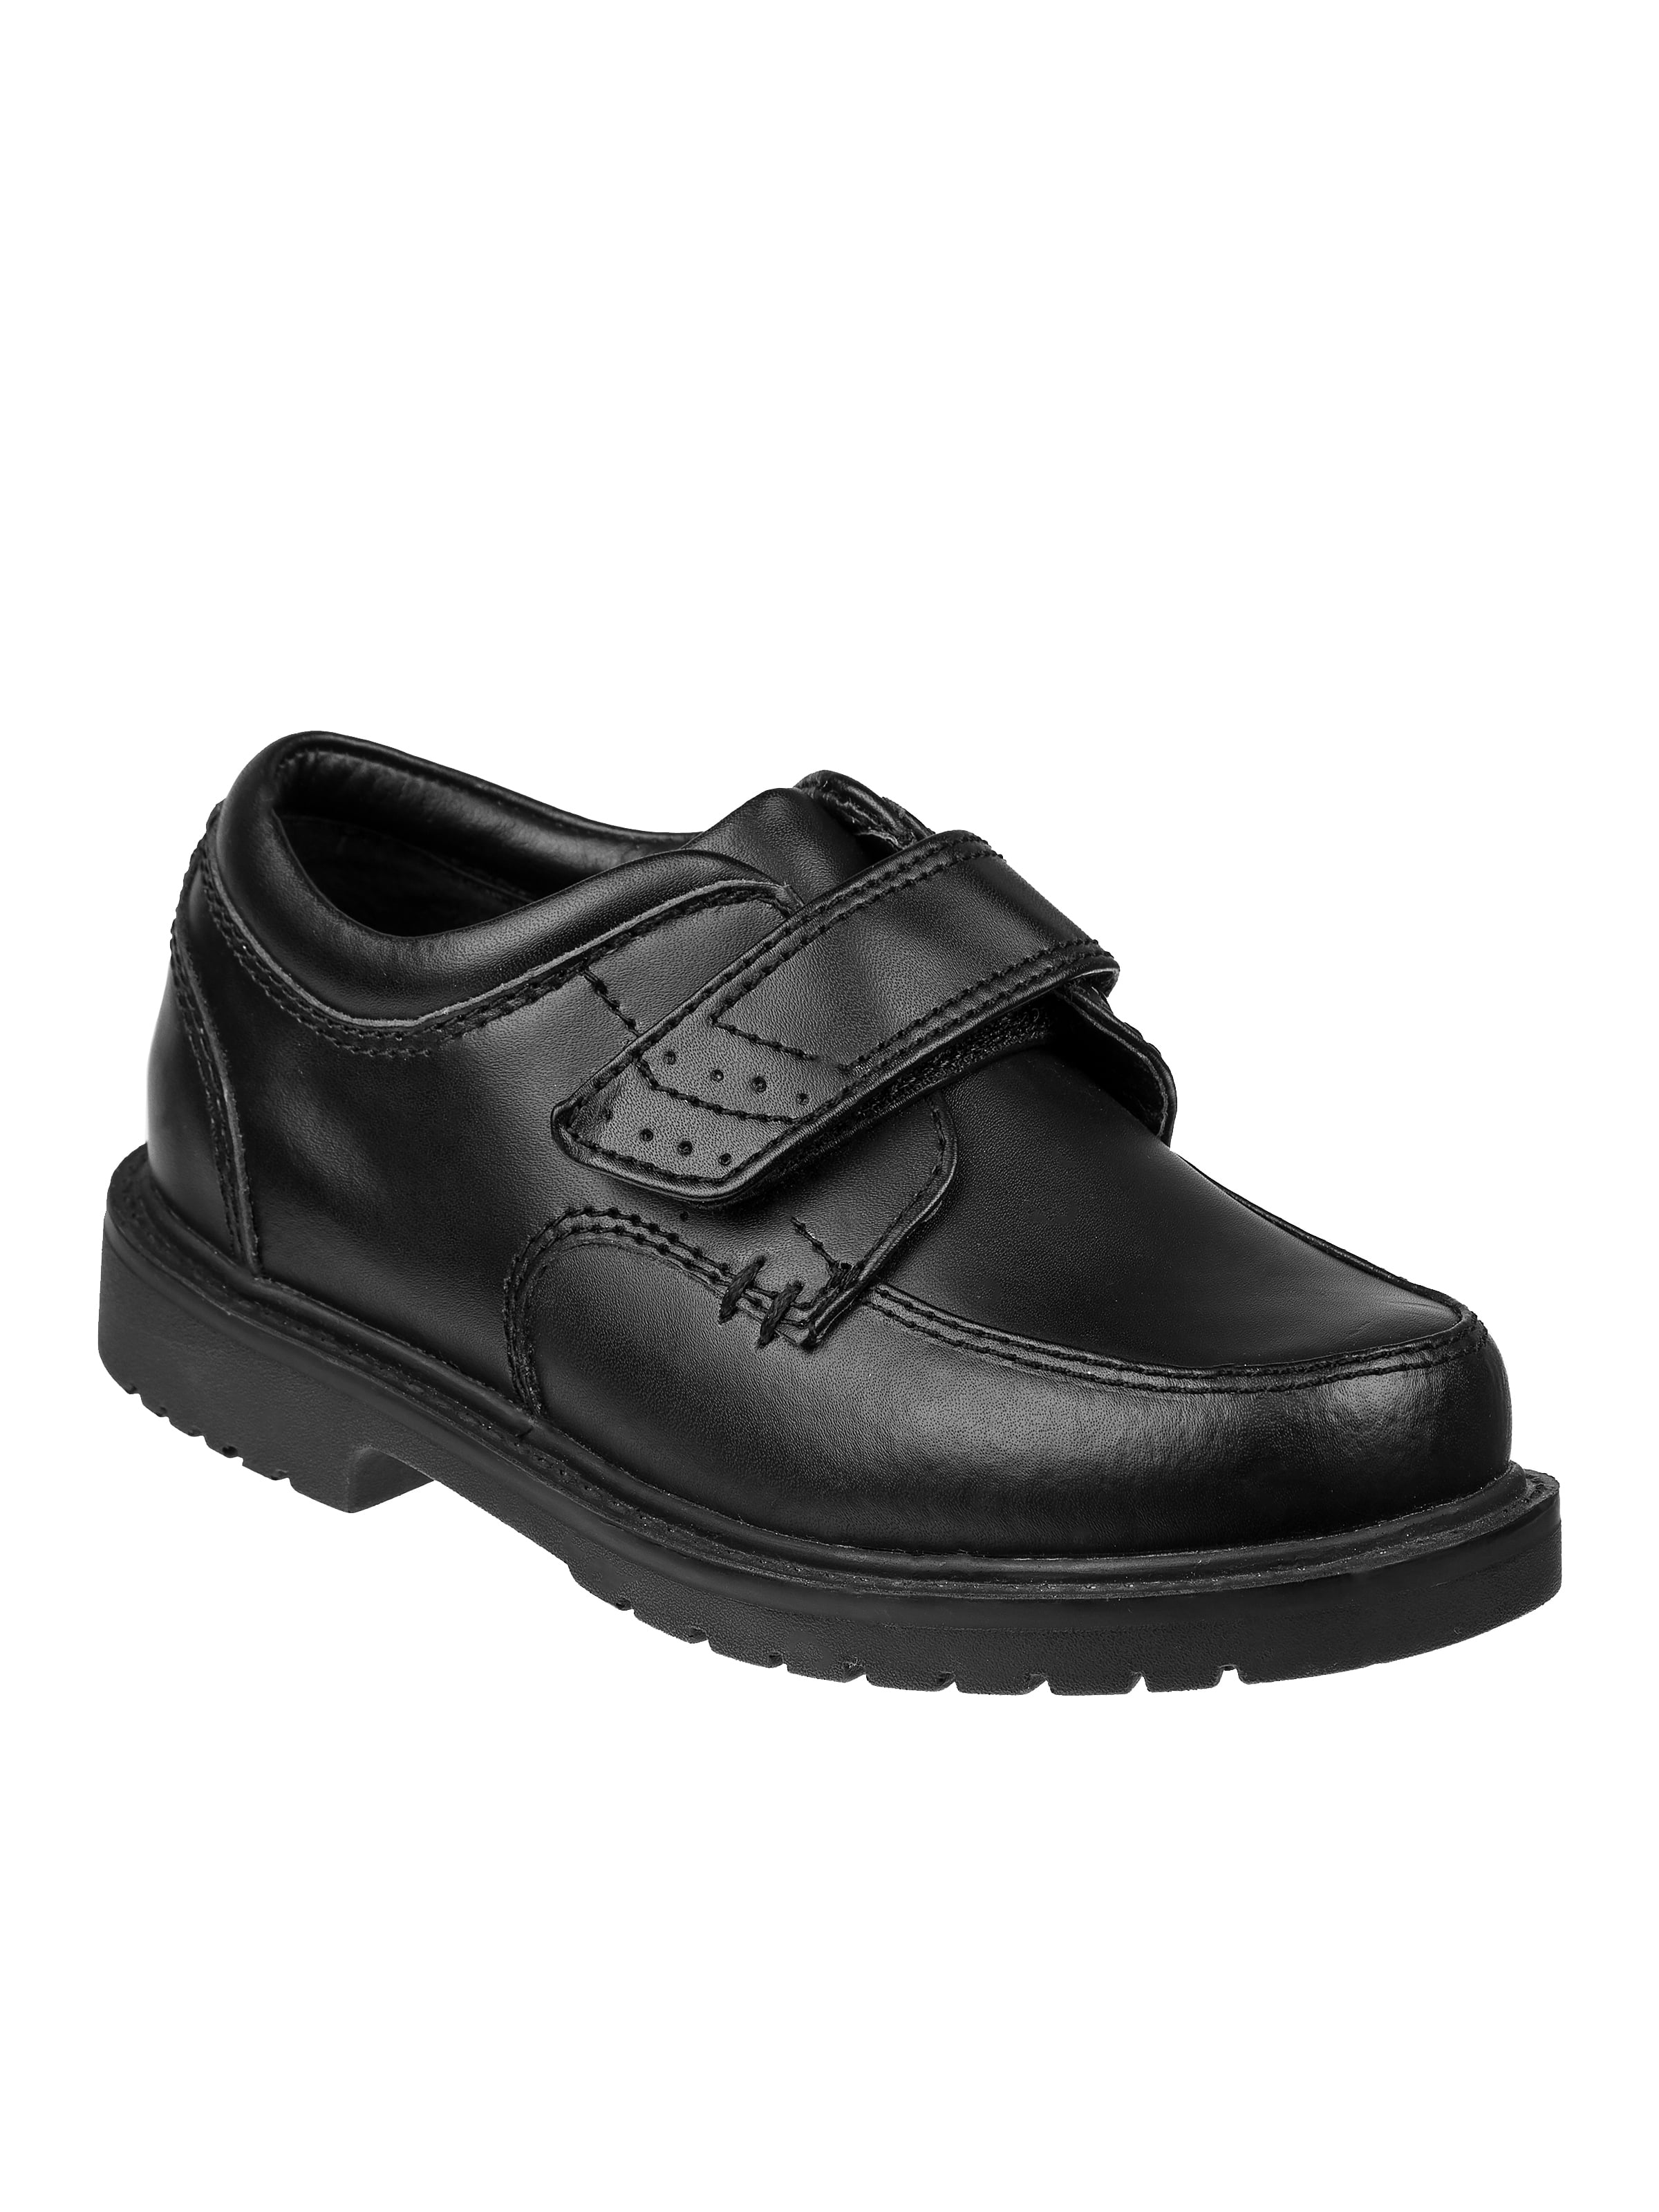 Boys Leather Patent Black School Occasion Shoes 8 Inf/8 Jun Size Hook&Loop Close 